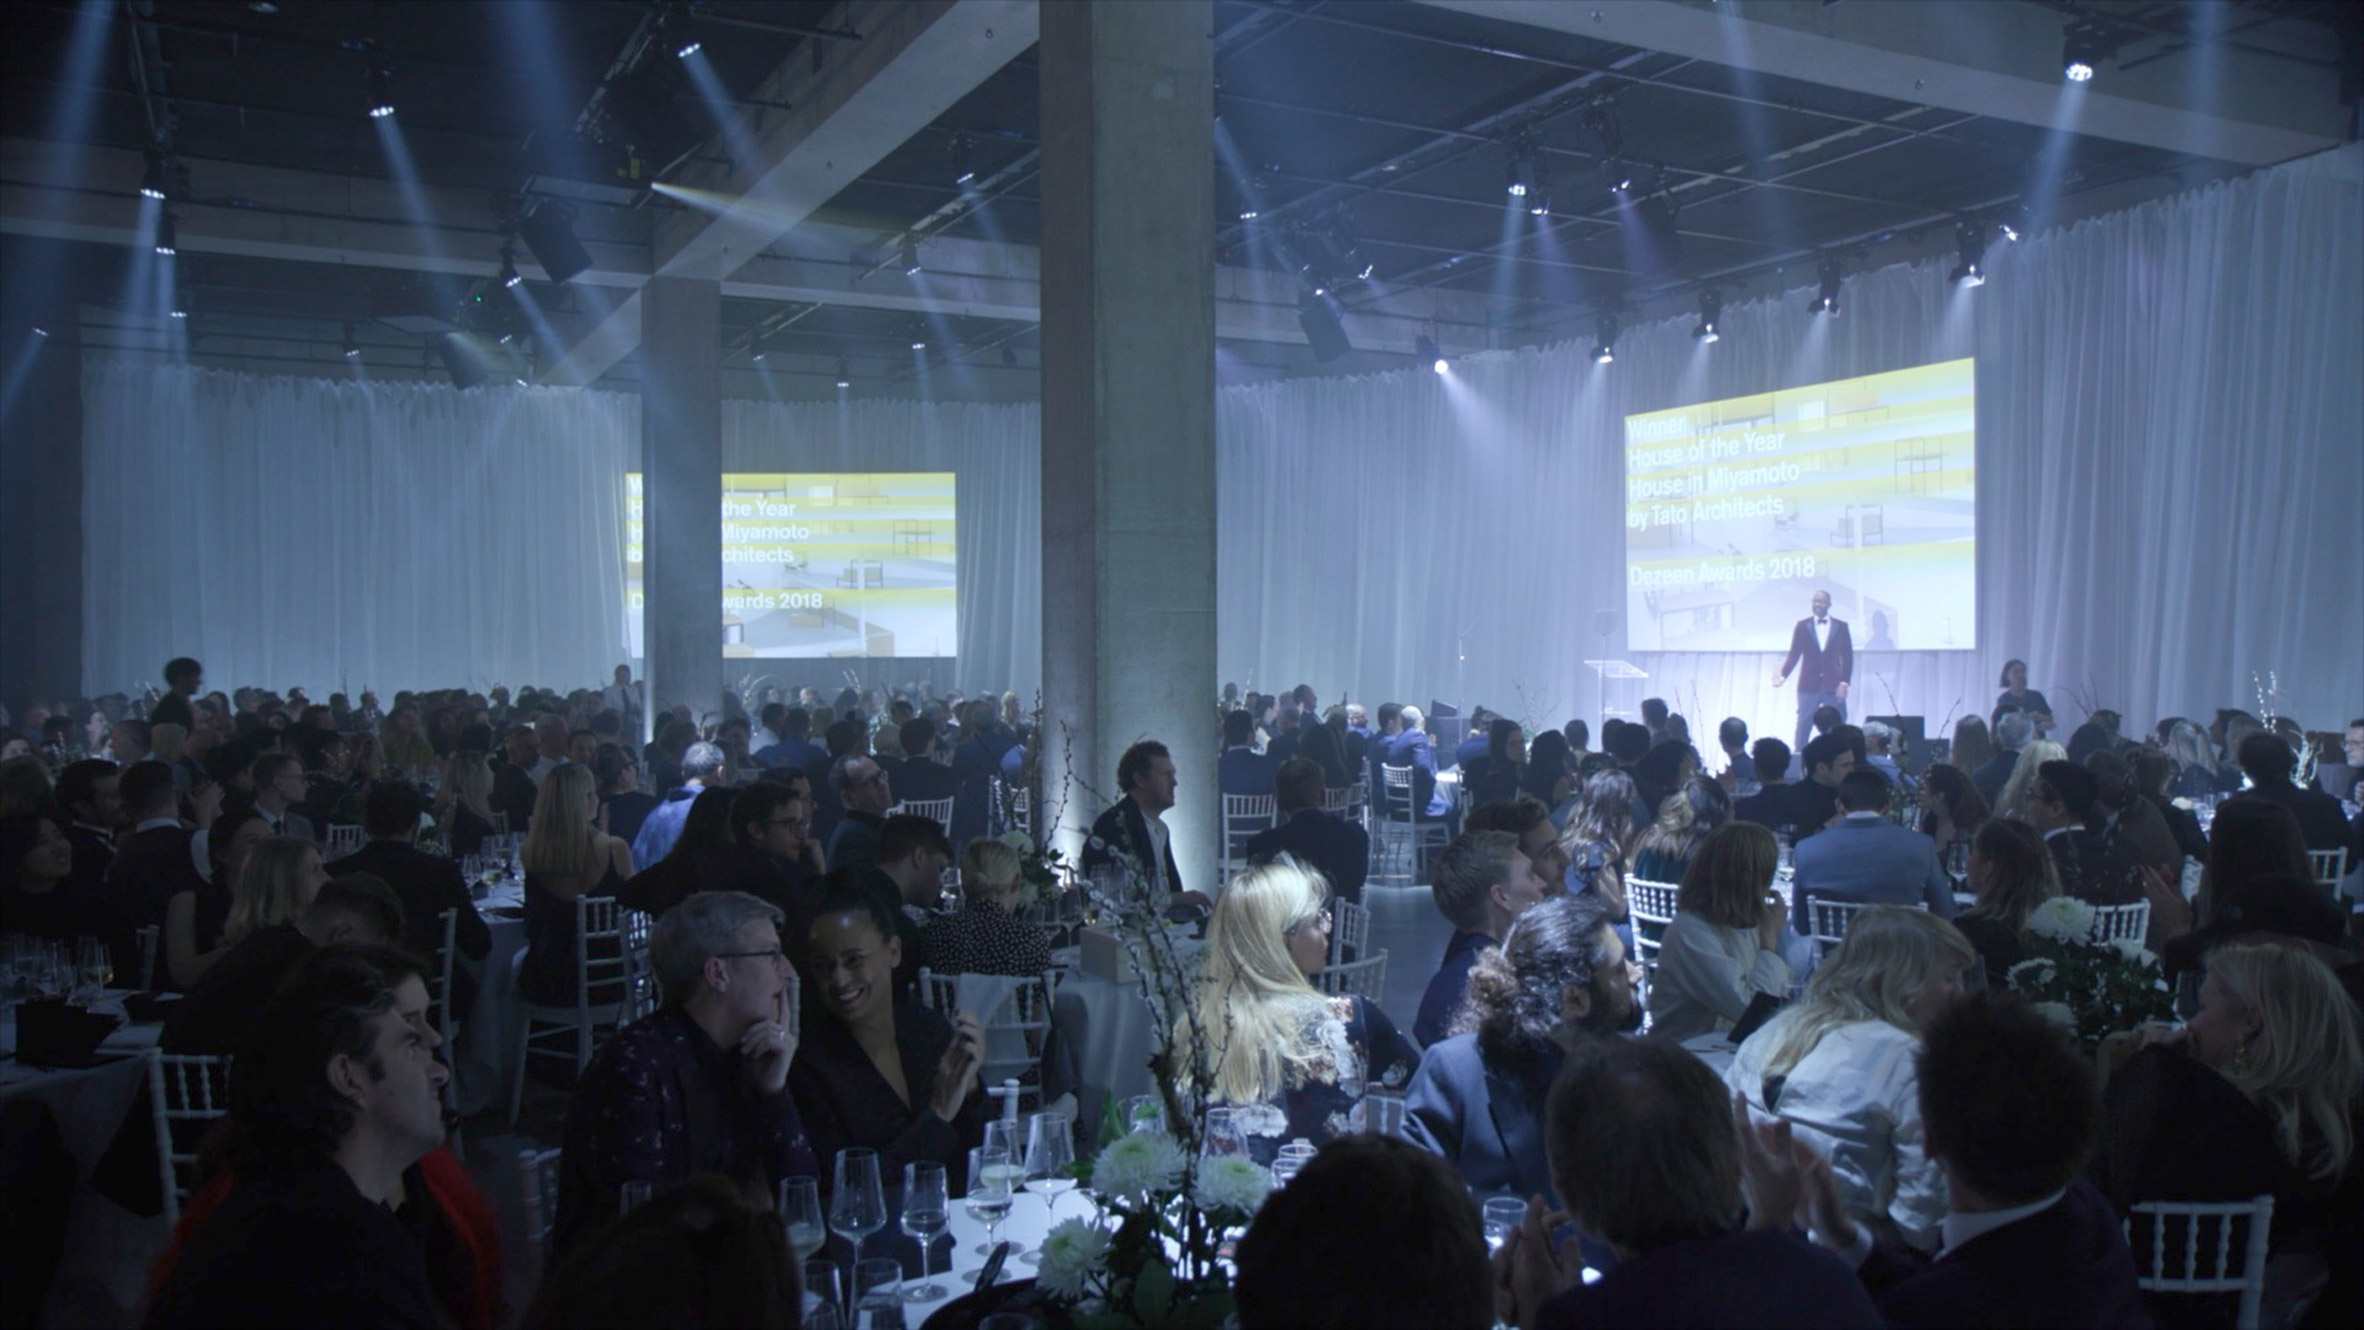 The events concept for the inaugural Dezeen Awards ceremony was designed by architect Sarah Izod